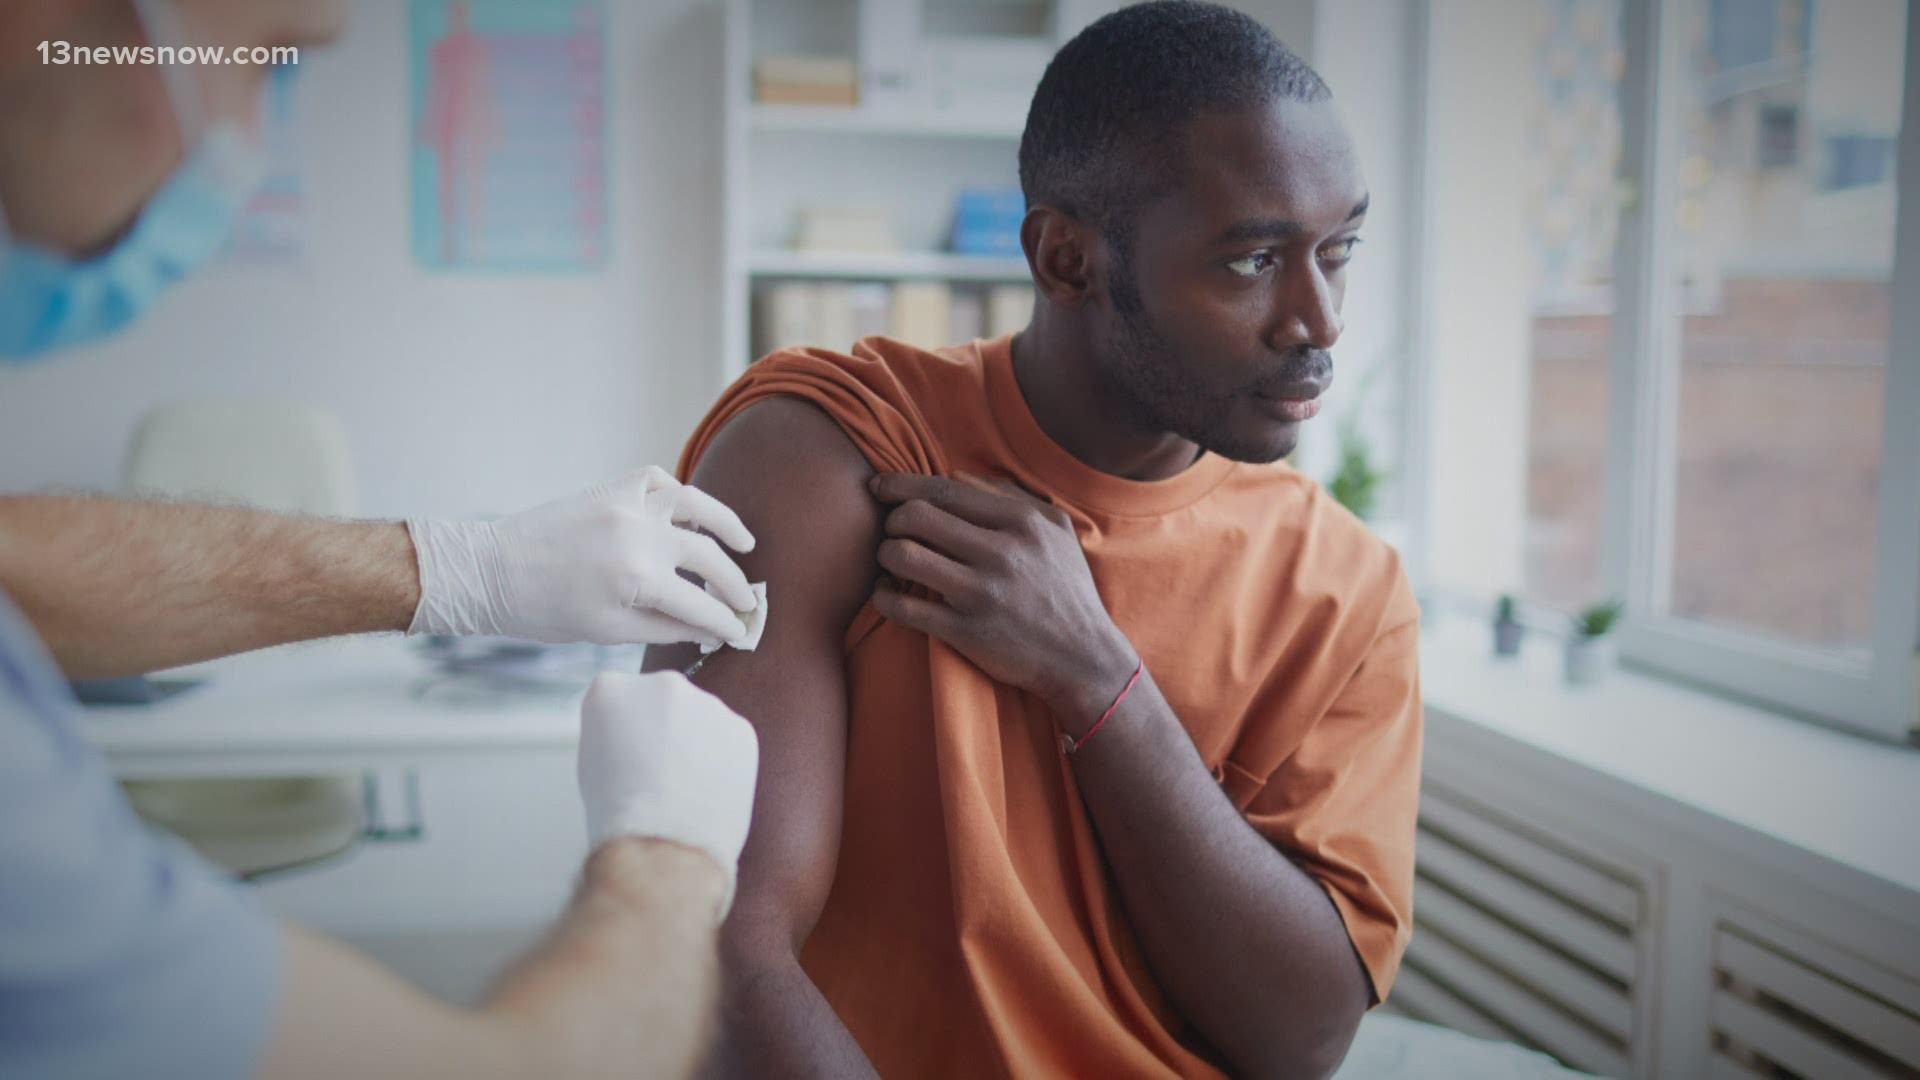 Pastors are taking over the efforts to build "vaccine trust." Eugene Daniel spoke to organizers who are working to make sure everyone who wants the shot, gets it.